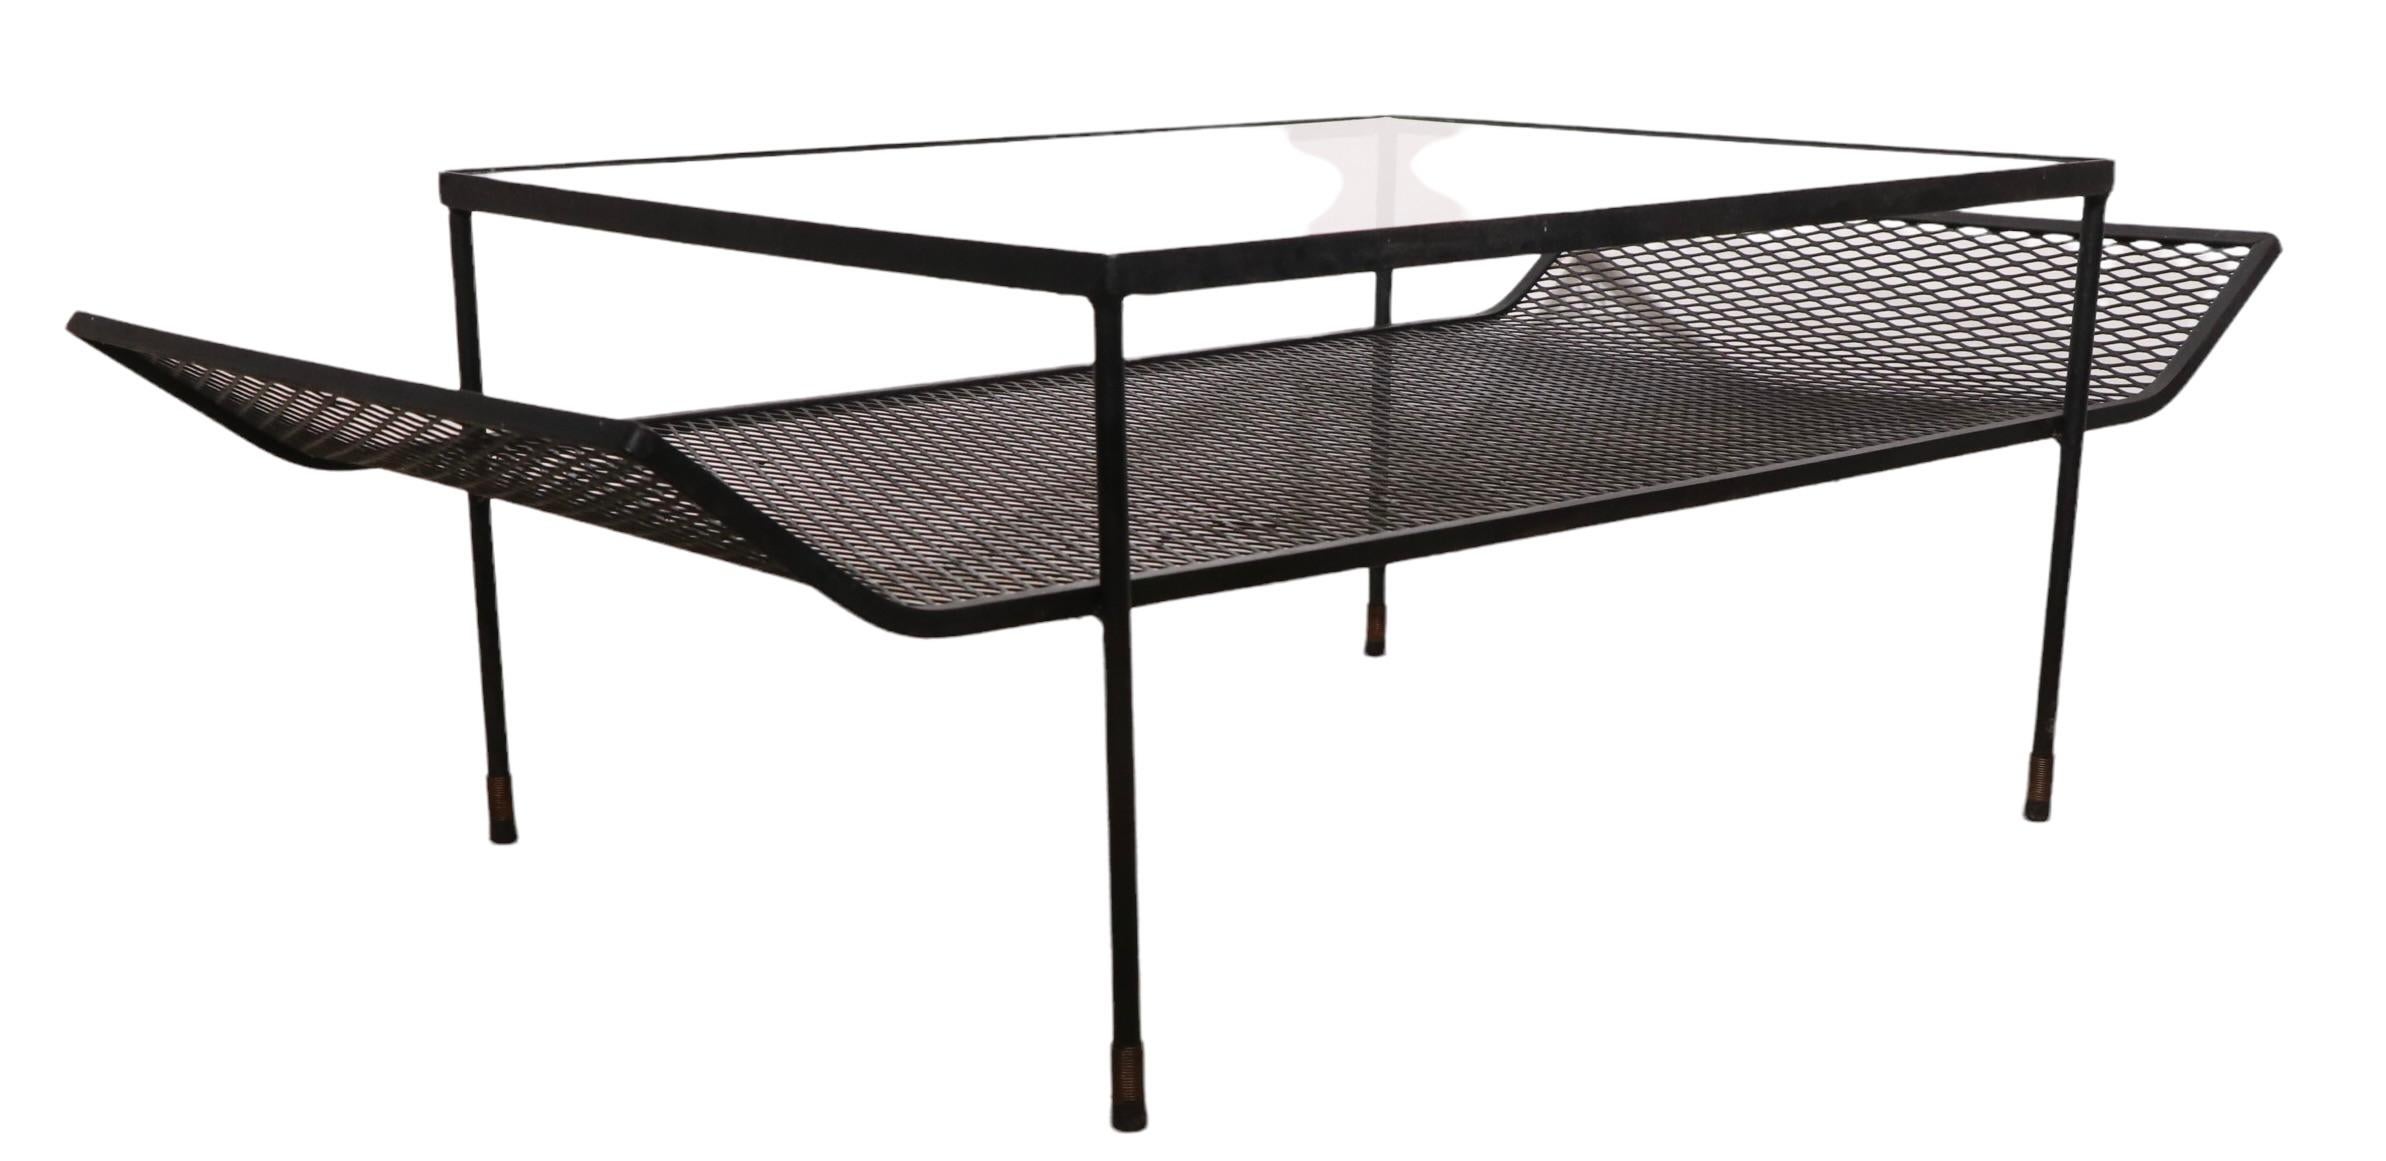 Architectural mid-century wrought iron, metal mesh and glass top coffee, cocktail table, attributed to Woodard, in the style of Paul McCobb, George Nelson etc. The table features a rectangular glass top surface, over an extended metal mesh lower